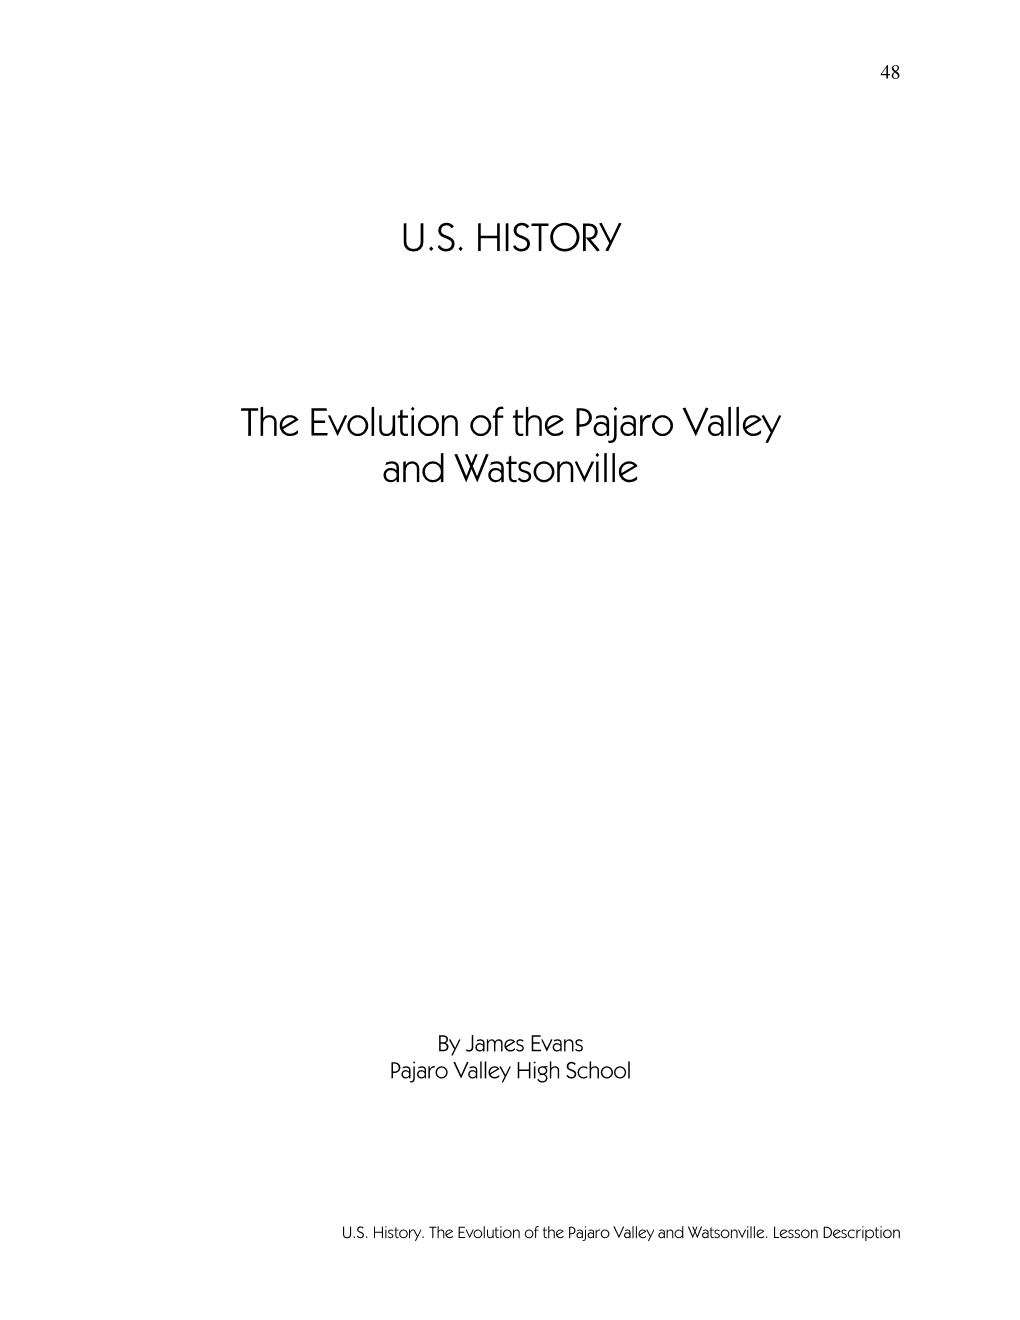 U.S. HISTORY the Evolution of the Pajaro Valley and Watsonville